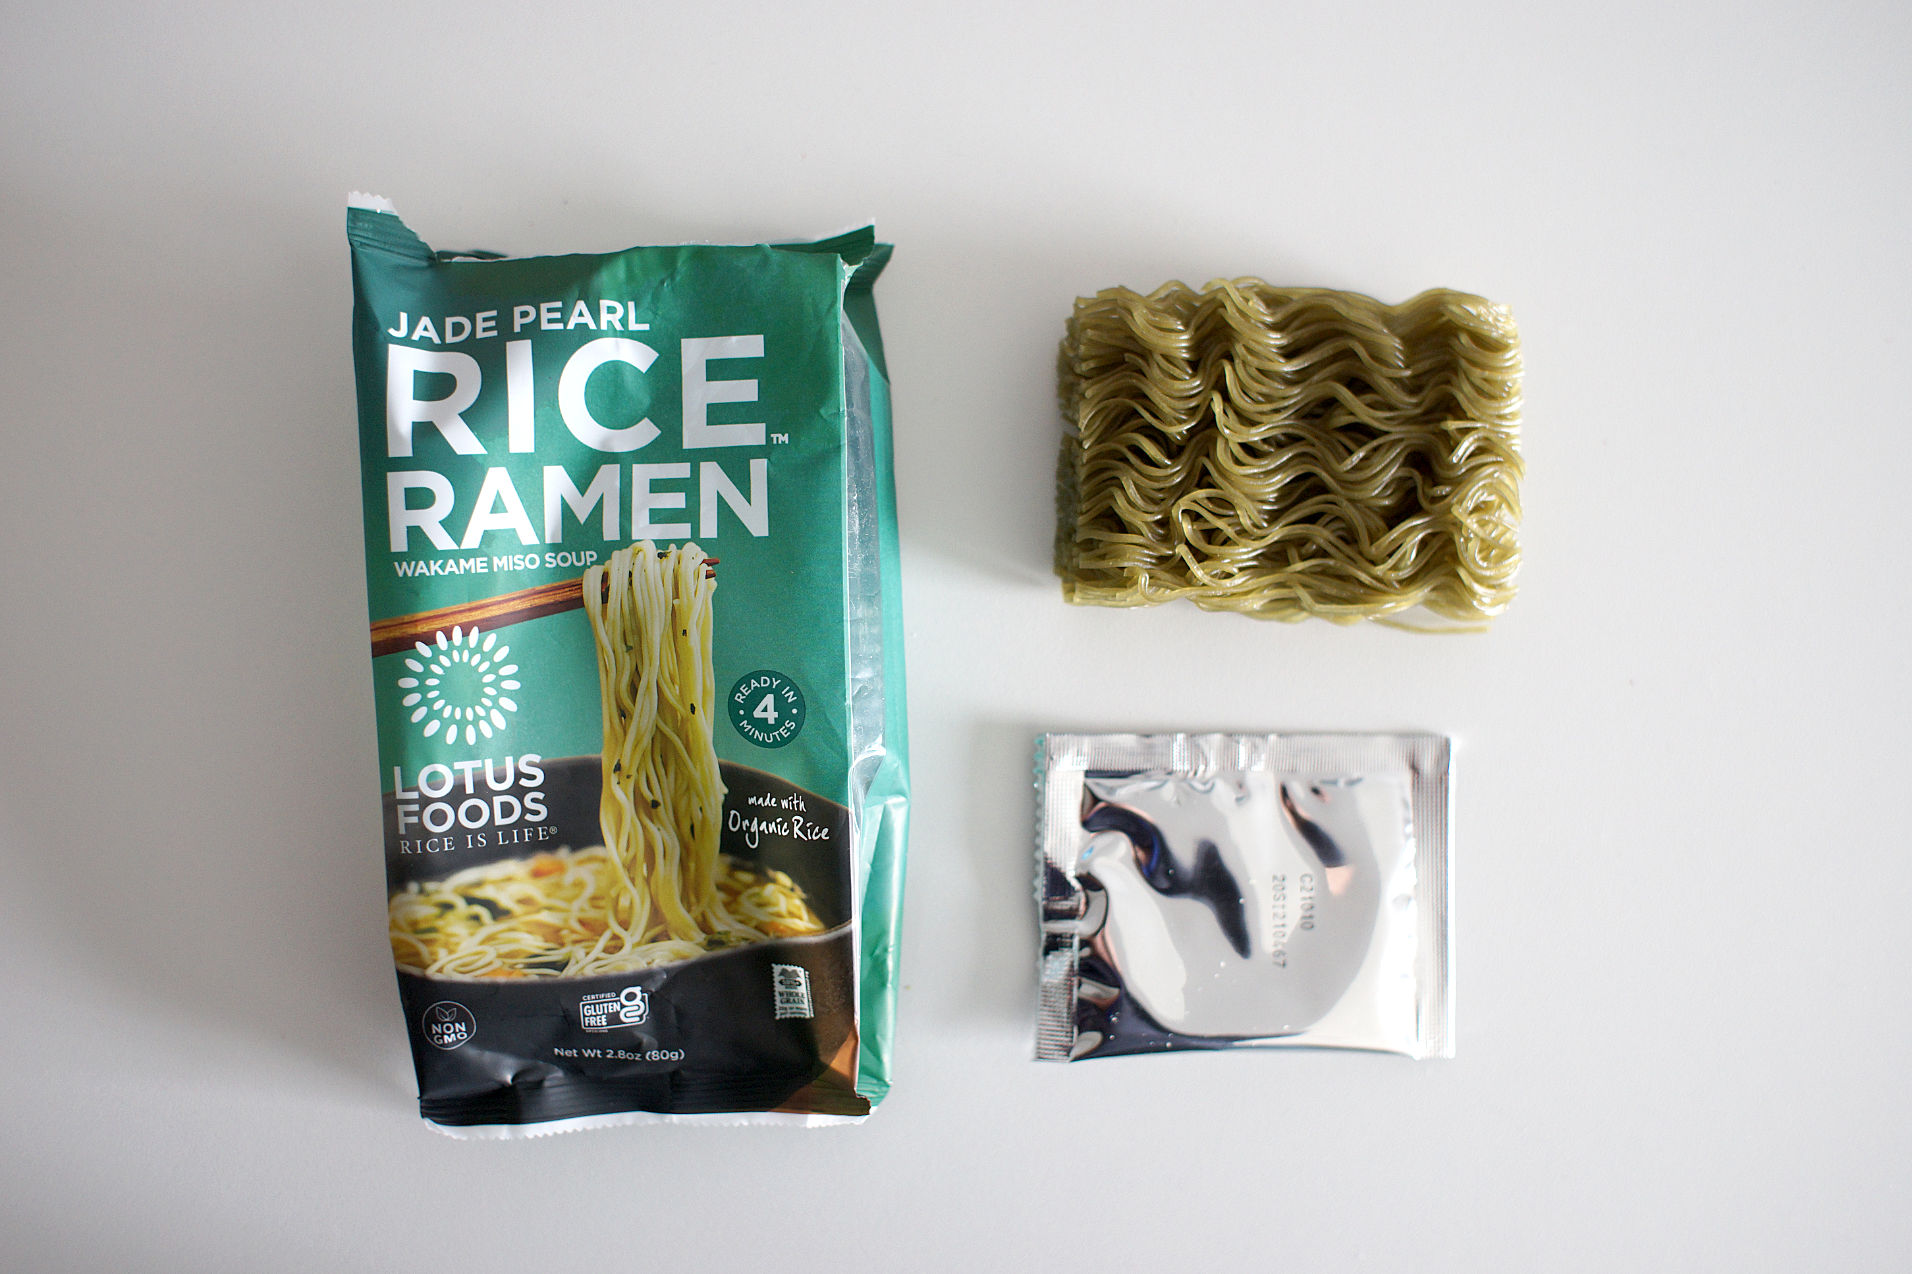 Jade Pearl noodles and white miso and seaweed packet